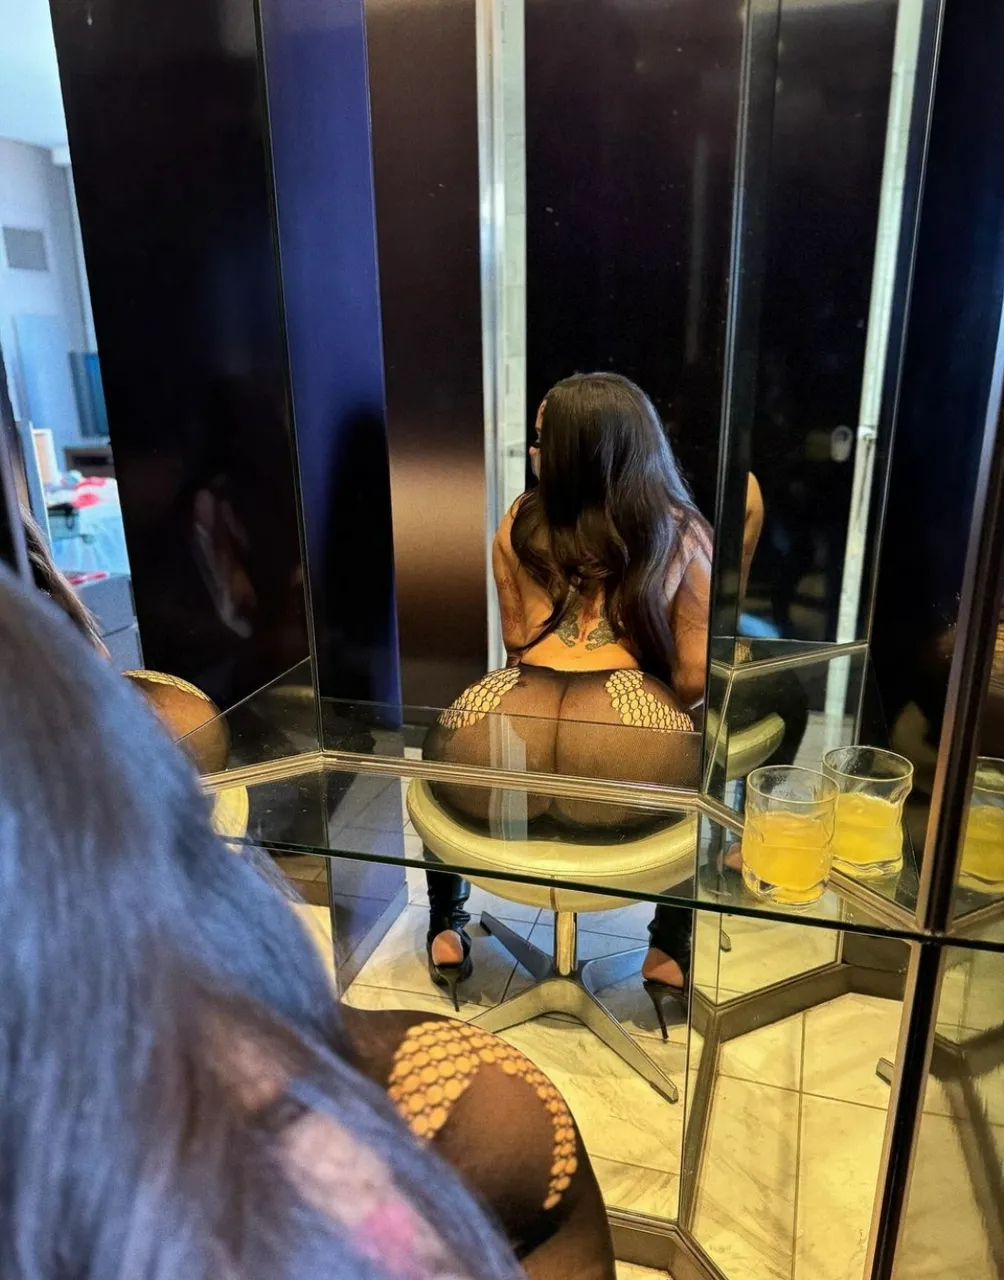 Escorts Indianapolis, Indiana Bad Bitch🍑👅💦🍆but you know I’m Classy🤤😍💯